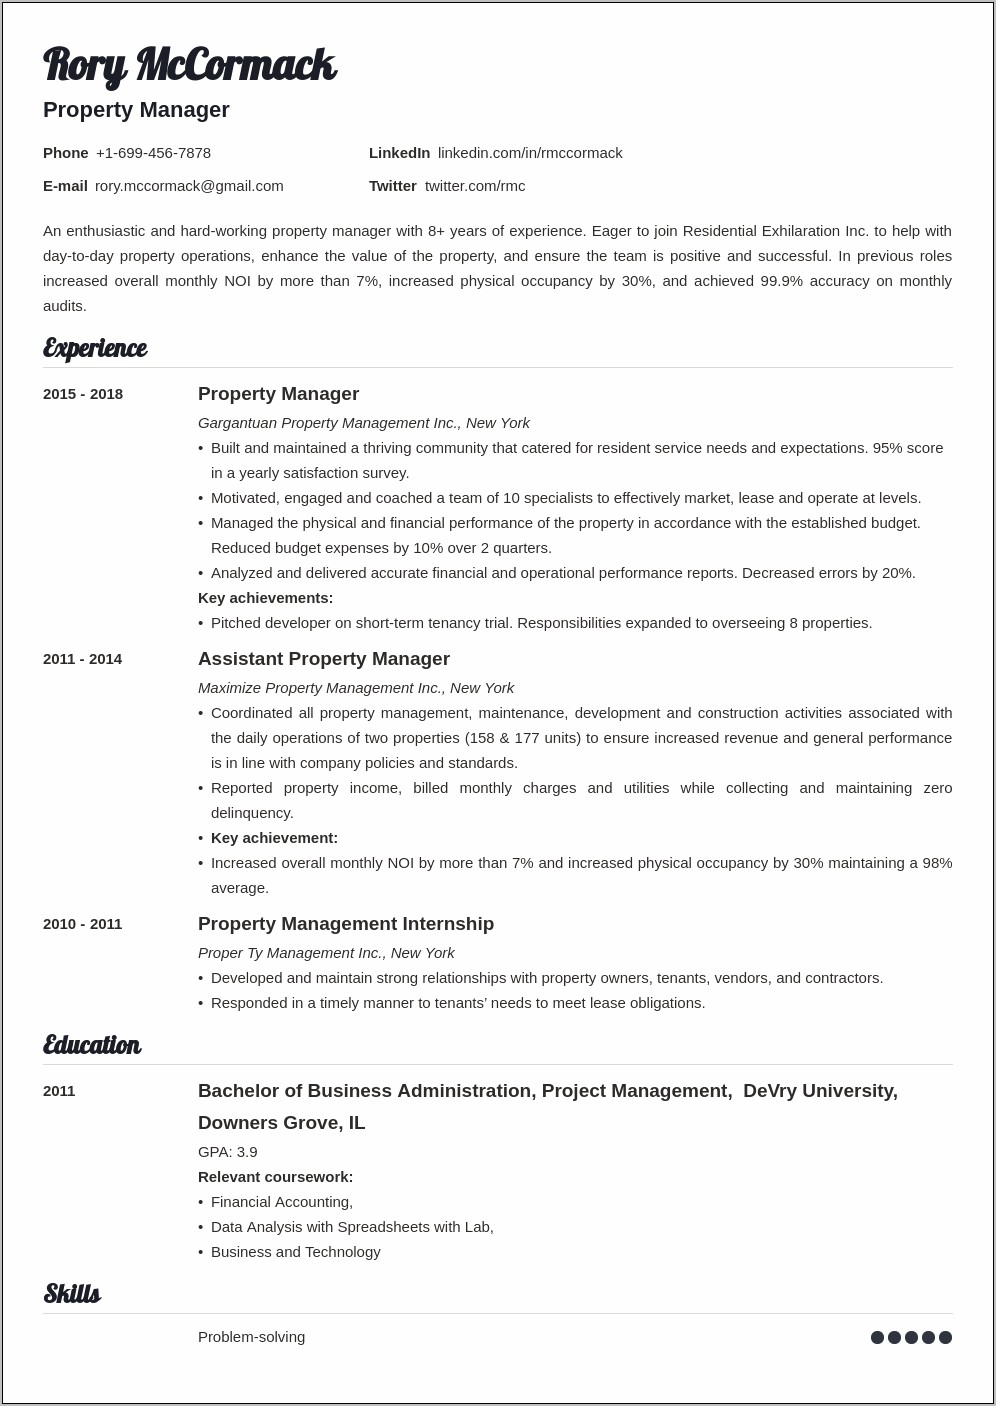 Manage Different Size Team Project Manager Resume